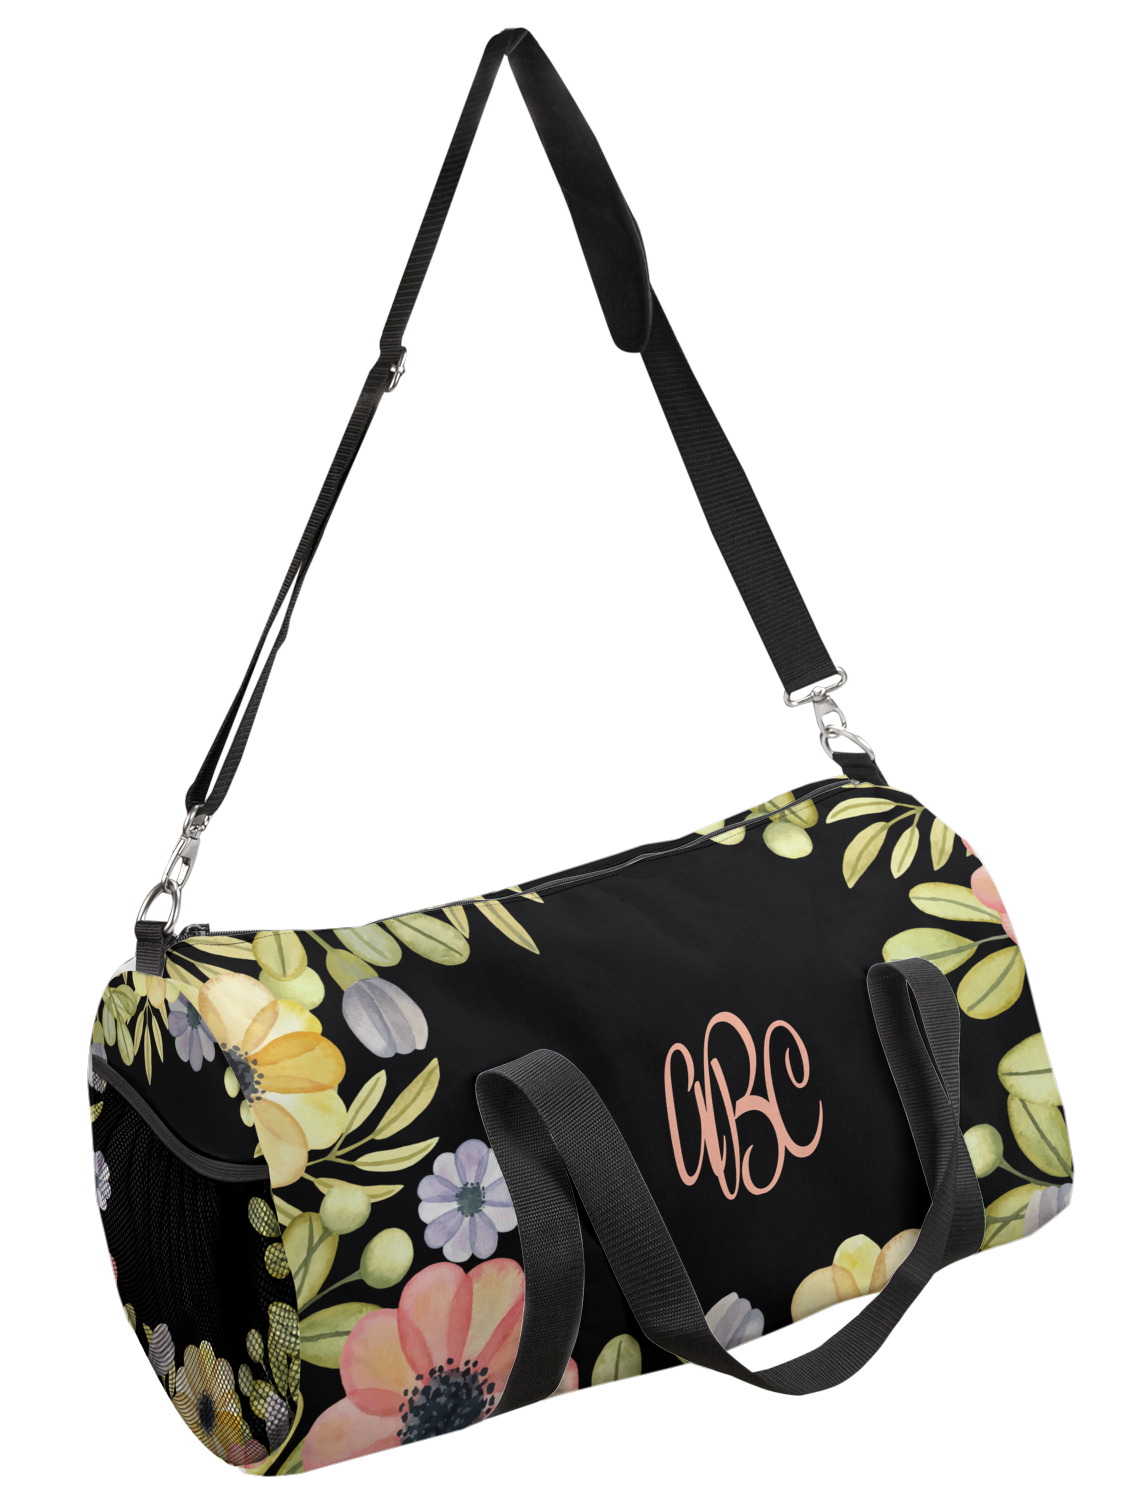 Boho Floral Duffel Bag - Large (Personalized) - YouCustomizeIt